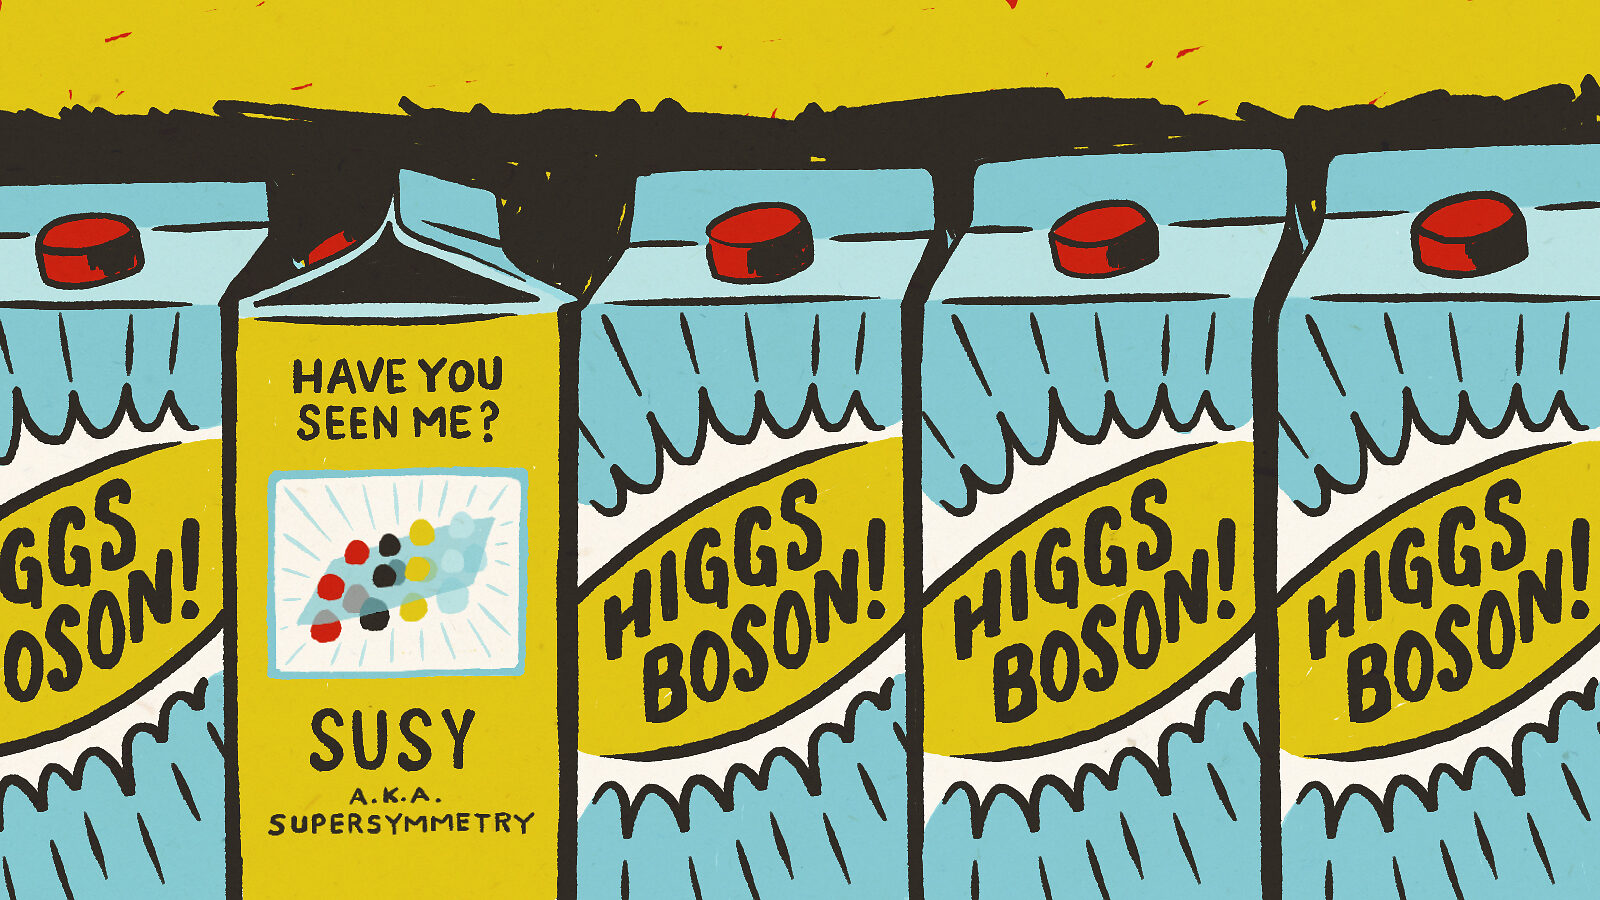 Illustration of Higgs Boson "milk cartons" with SUSY designated as missing